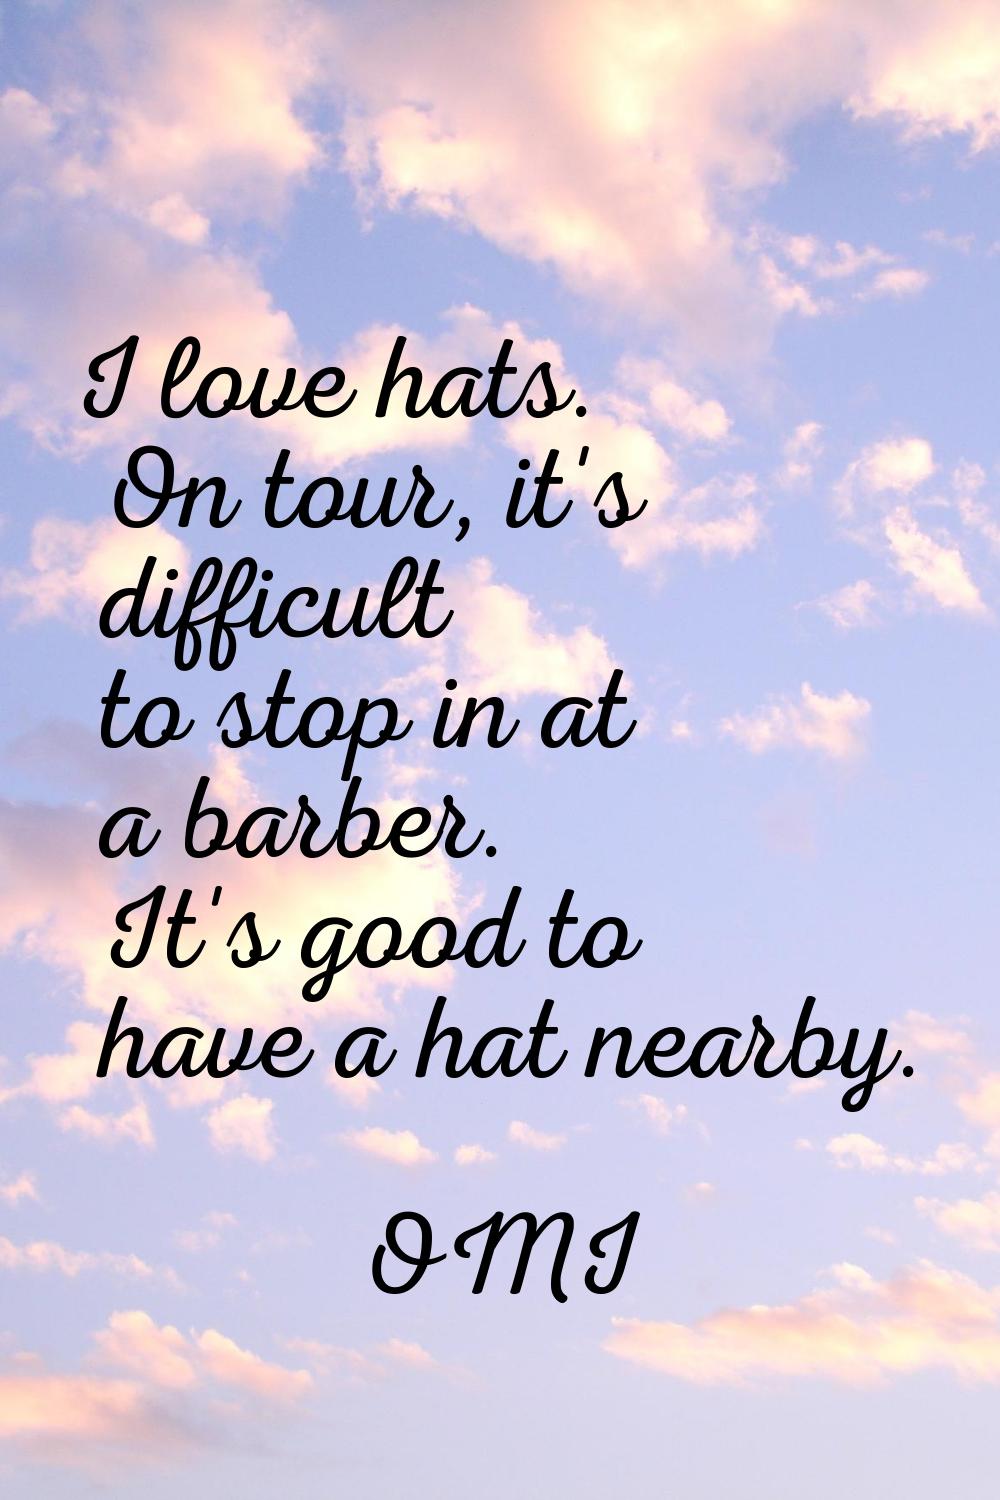 I love hats. On tour, it's difficult to stop in at a barber. It's good to have a hat nearby.